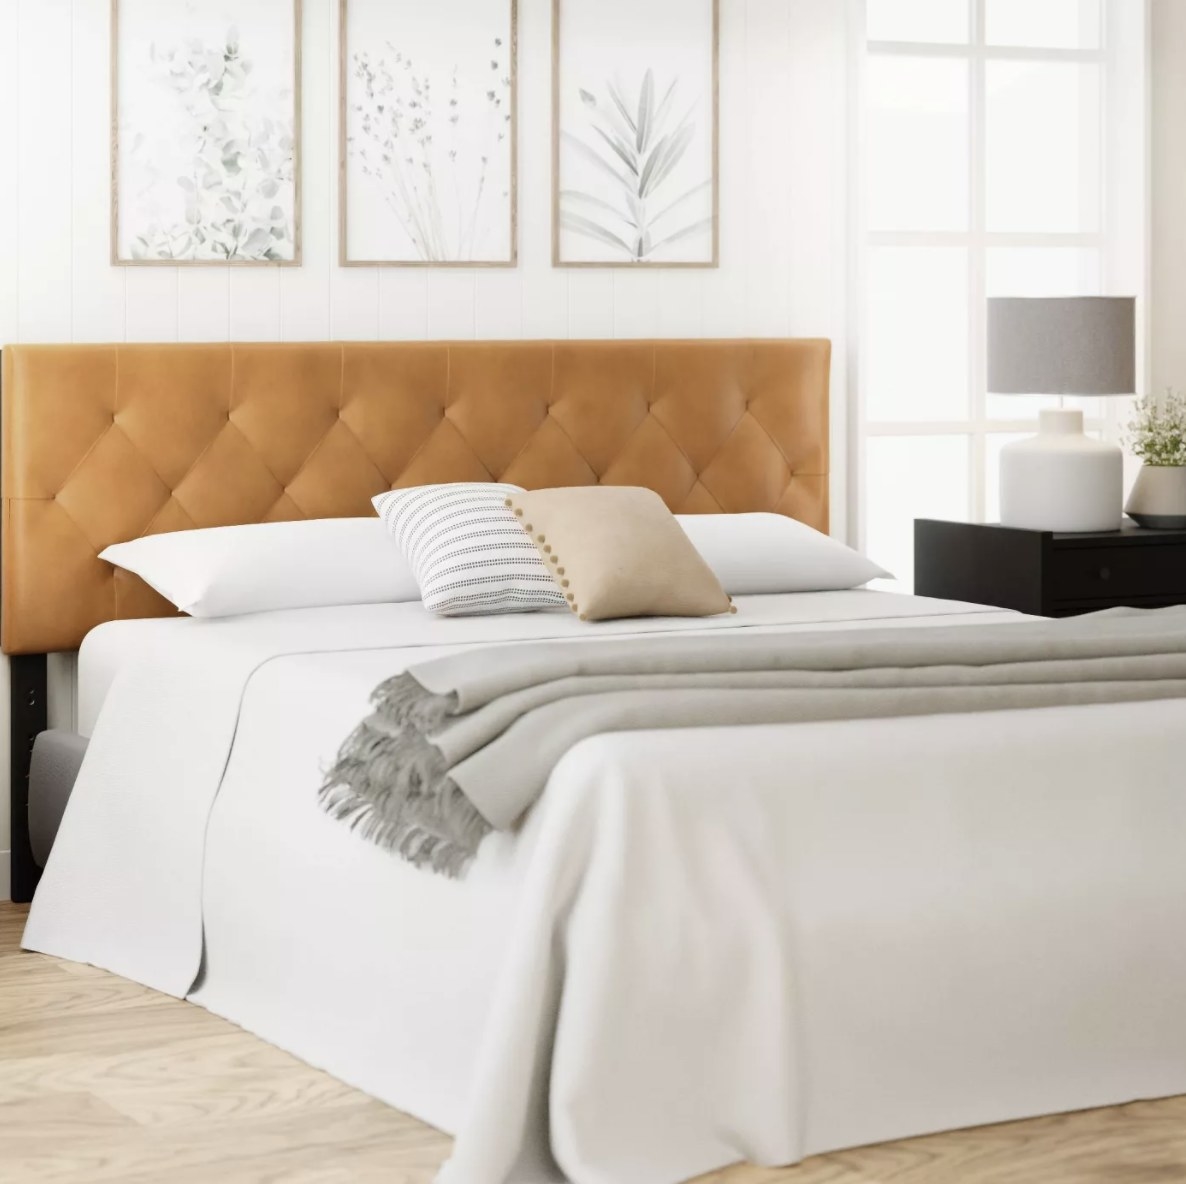 The light brown headboard has diamond shapes from the faux leather detailing and pops against a mostly white bed and room